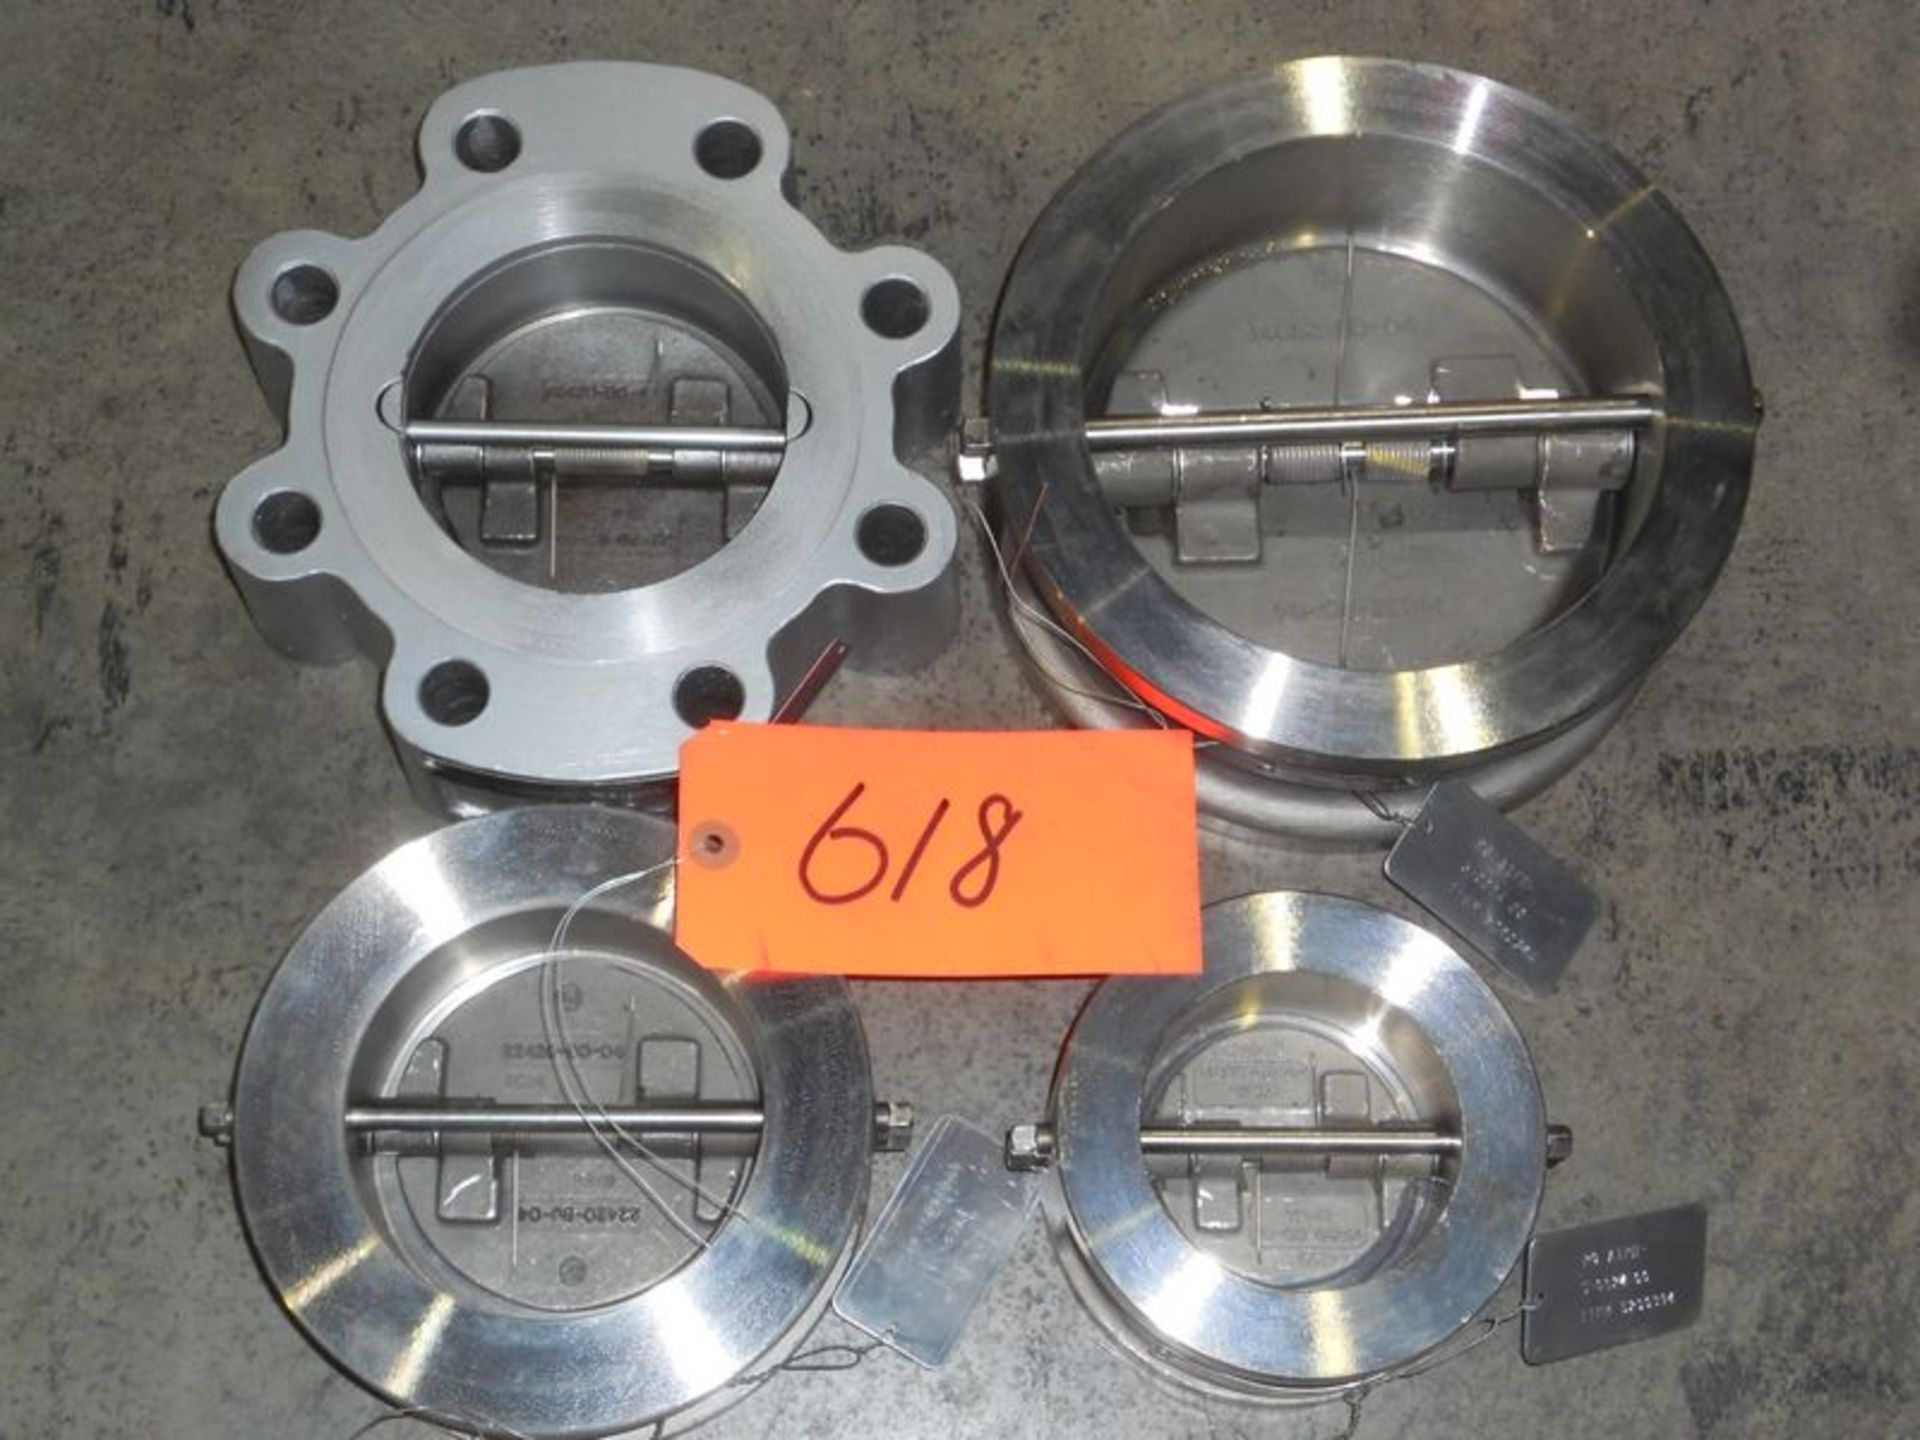 Lot (35) Crane Duo Check II butterfly valves; (7) M/N 3-G15CPF-9, 3", CPW psi 275, (9) M/N 4- - Image 2 of 2